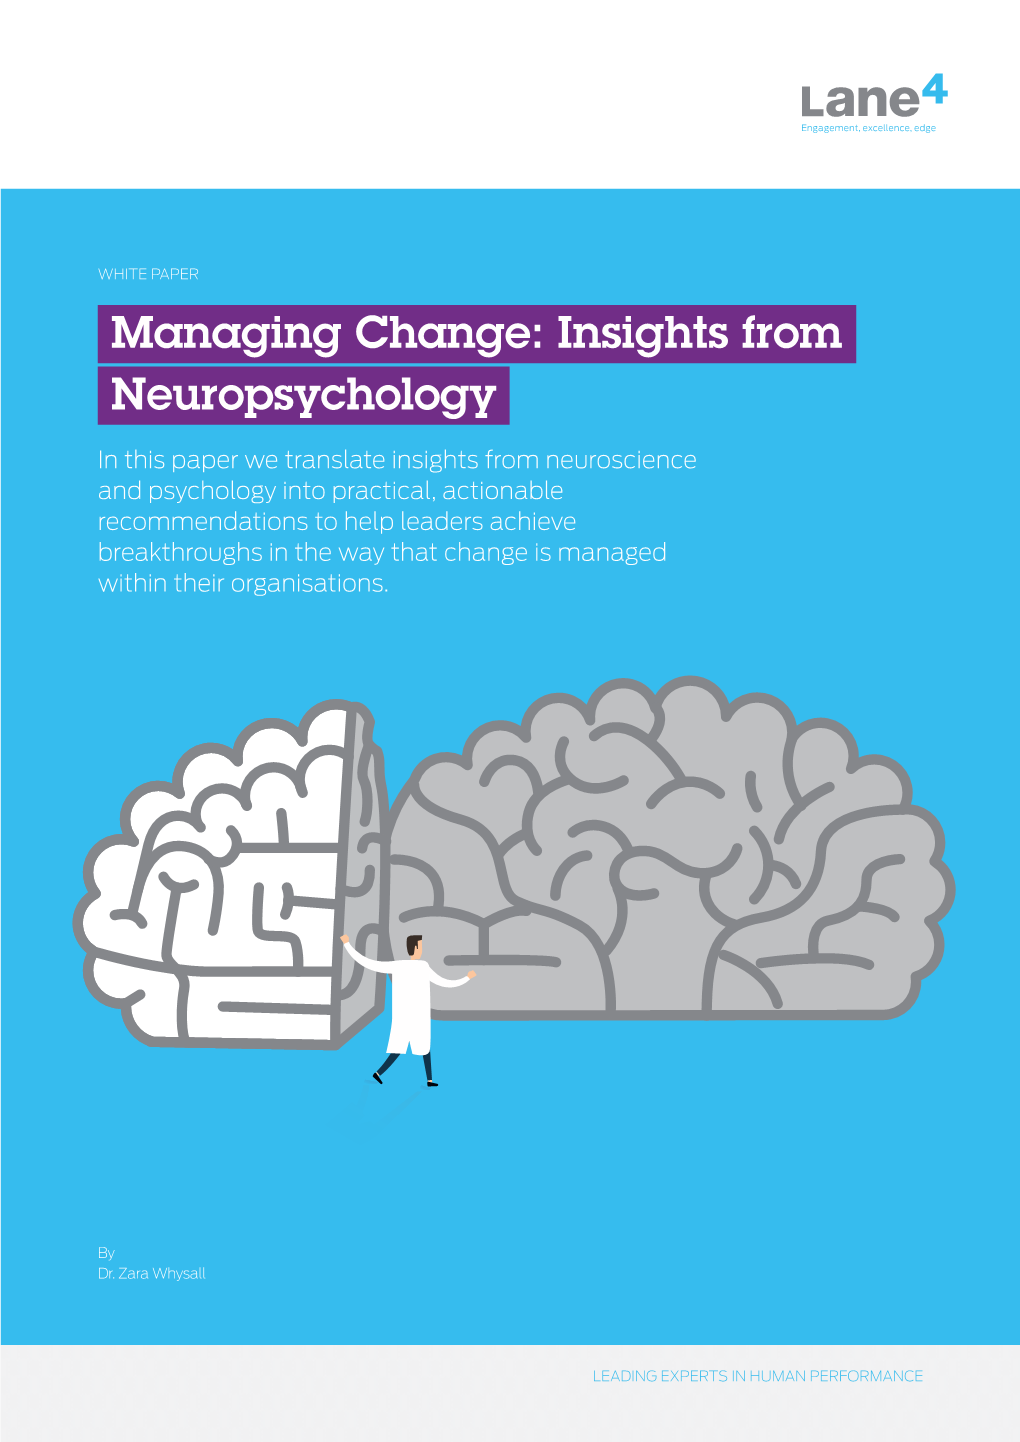 Managing Change: Insights from Neuropsychology